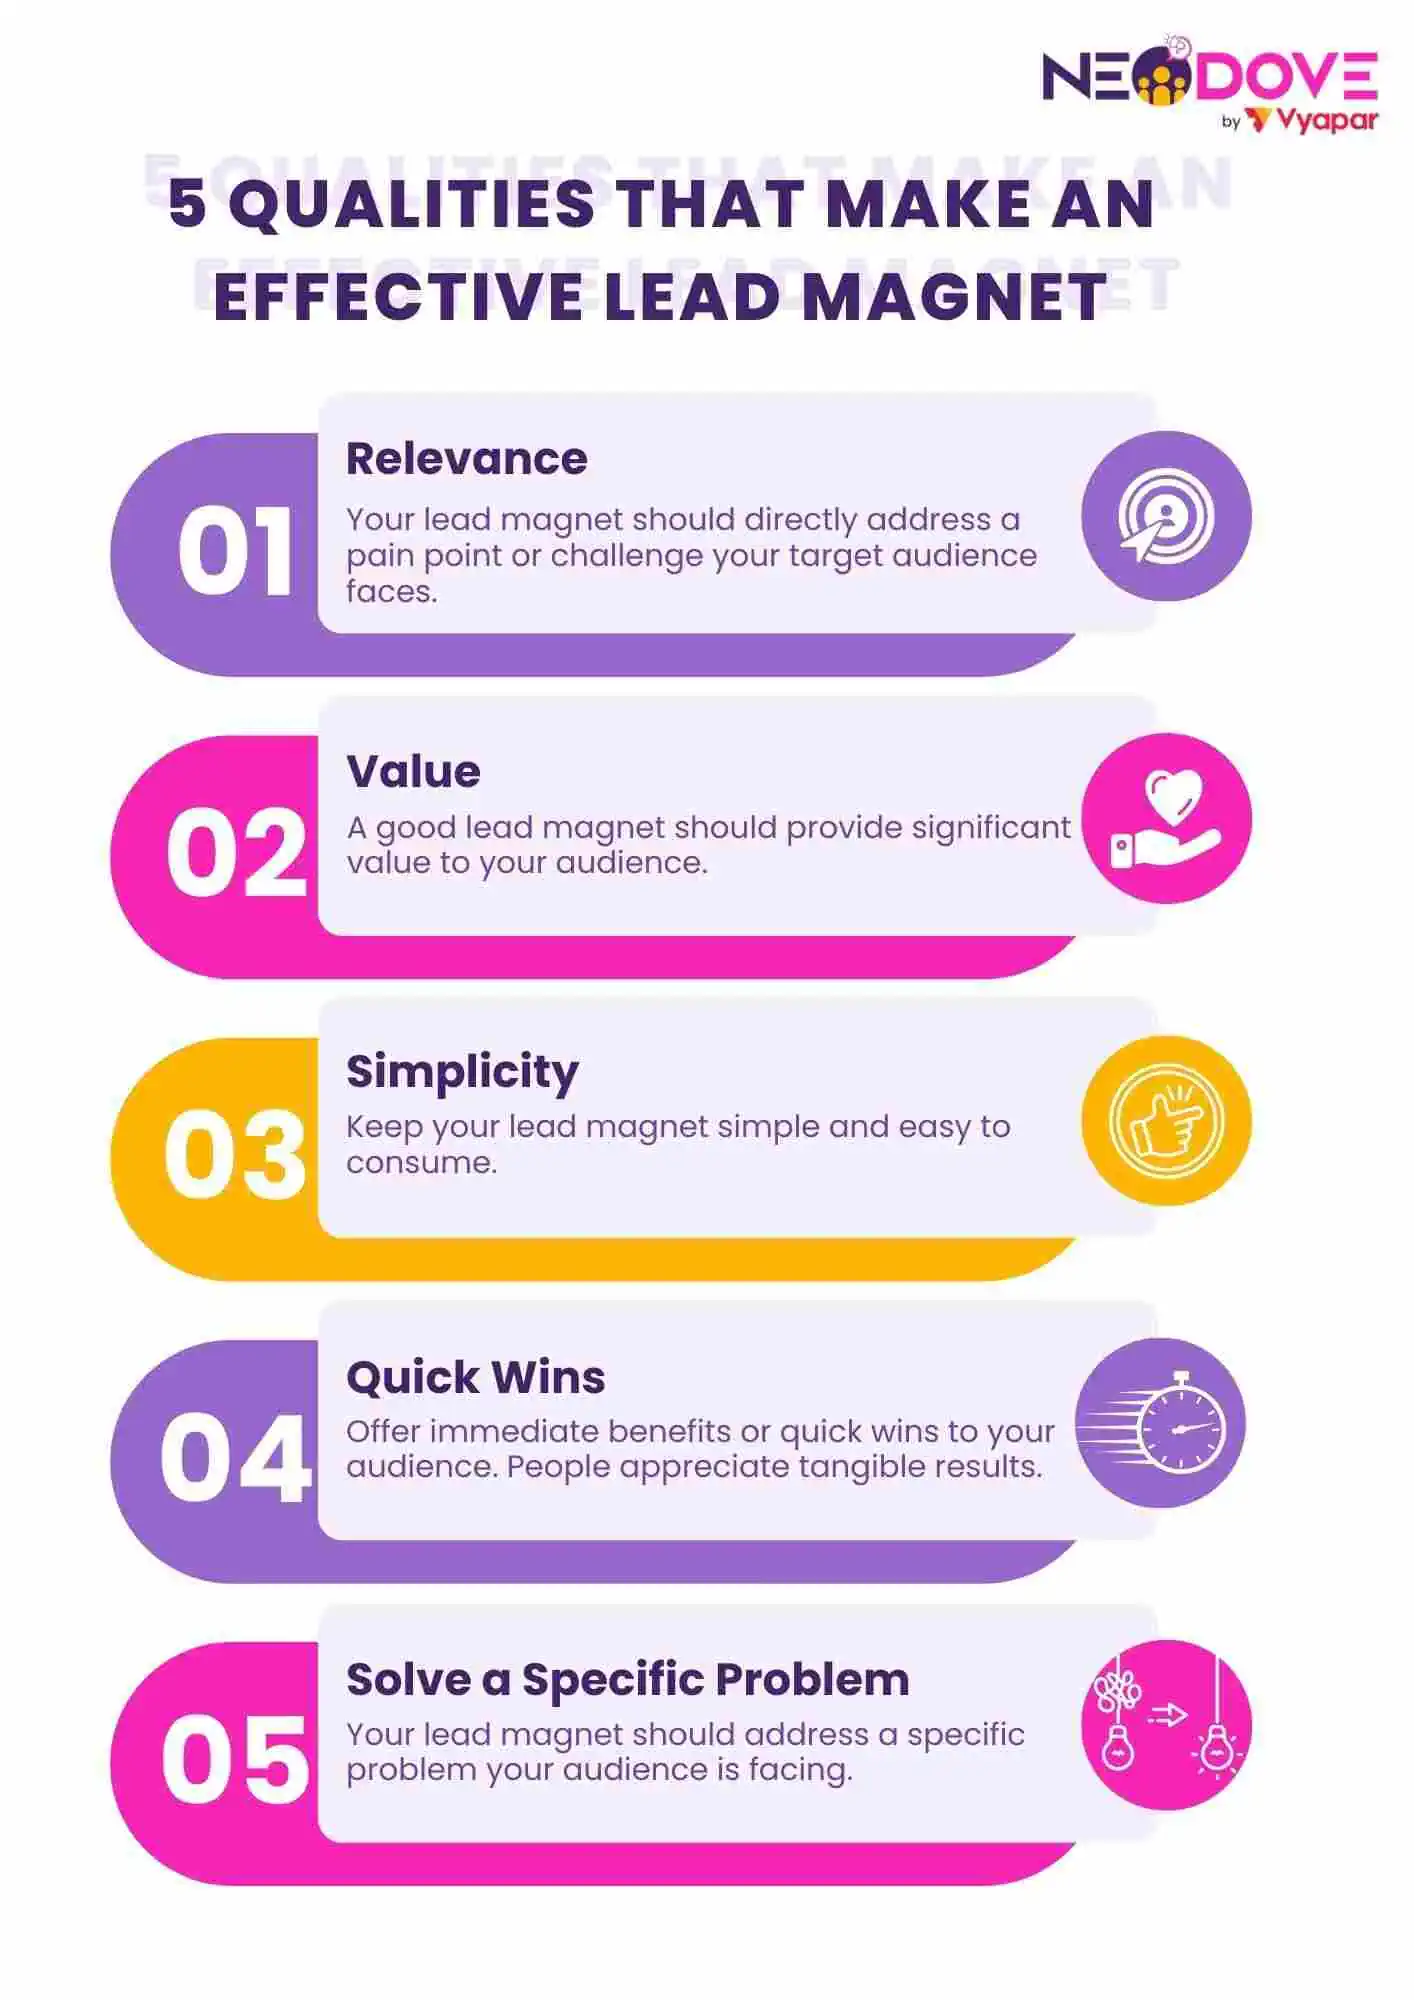 5 Qualities That Make An Effective Lead Magnet - Neodove